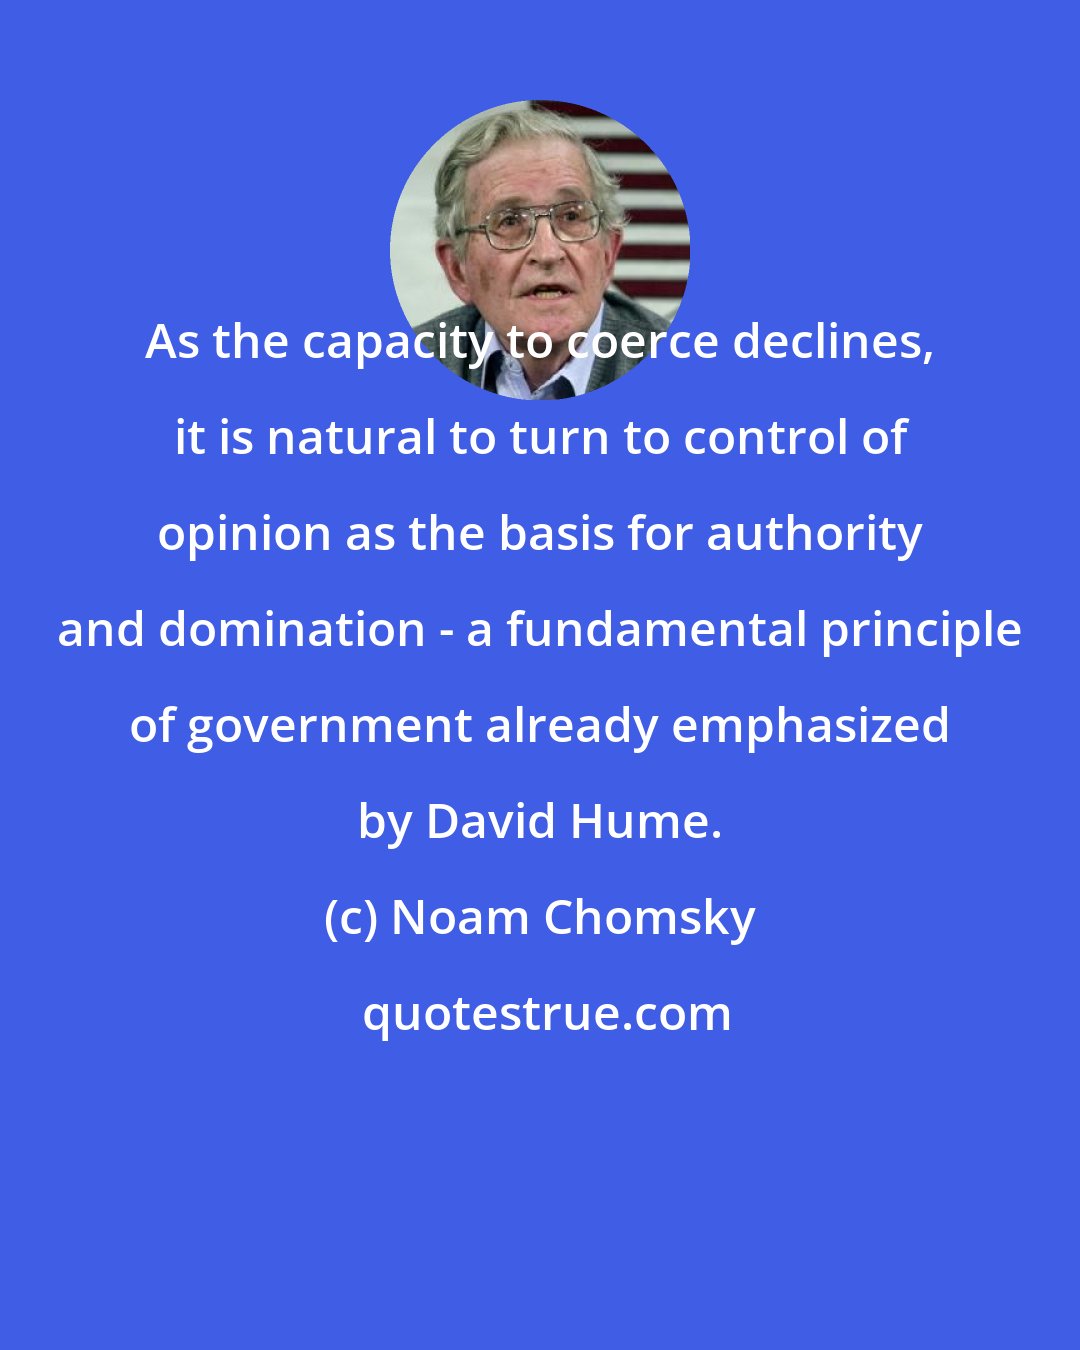 Noam Chomsky: As the capacity to coerce declines, it is natural to turn to control of opinion as the basis for authority and domination - a fundamental principle of government already emphasized by David Hume.